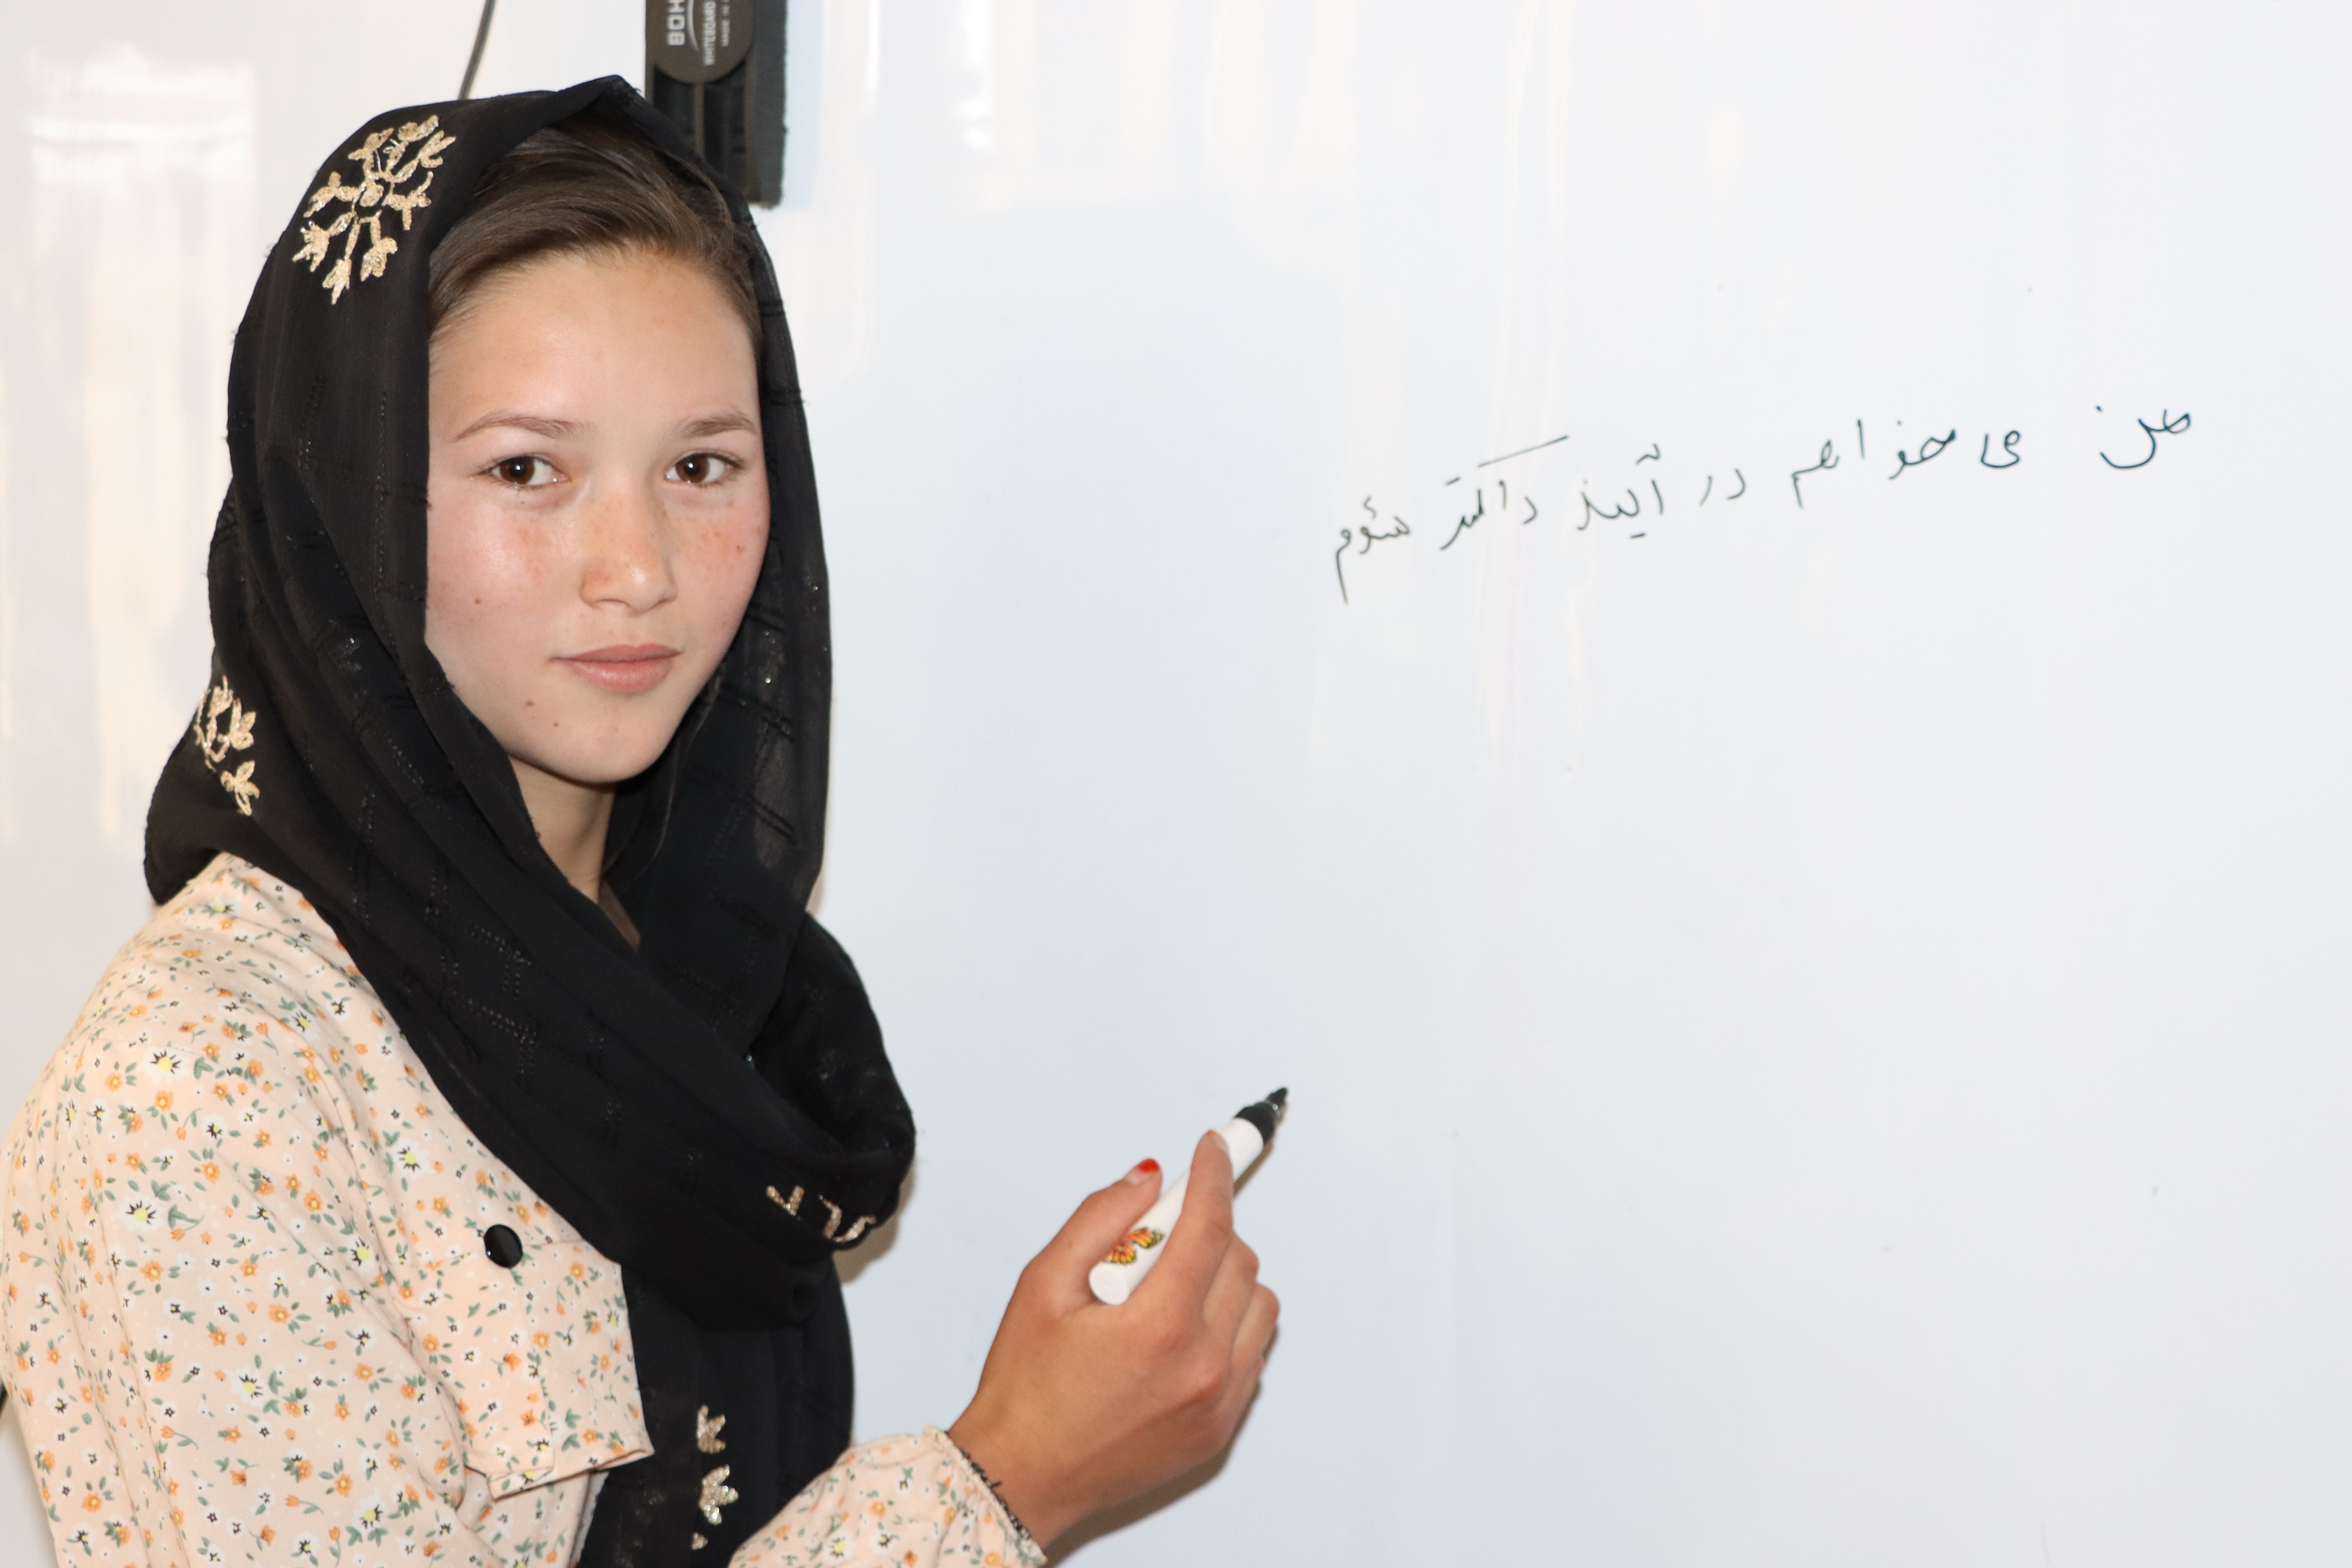 I want to become doctor; Shakiba Amiri who is 14 years old, the resident of Bamyan province, Yakawalan one district. She is the student of Gazak school. Shakiba Amiri studies in the sixth grade. “I want to become doctor in the future, so I would like to treat my sisters in my own country, and this is my expectation to acquire higher education in the field of medicine, this is not only my big dream, but also my family wishes to study medical faculty. She has also said that she has been the only one in her family who has been provided with the opportunity to study, and I will extend this culture further.” Says Shakiba. Gazak school is supported by SCA where 246 students are studying, 125 are girls and 121boys. In addition, 9 teachers are engaged in teaching, 1 is male and 8 are female teachers.